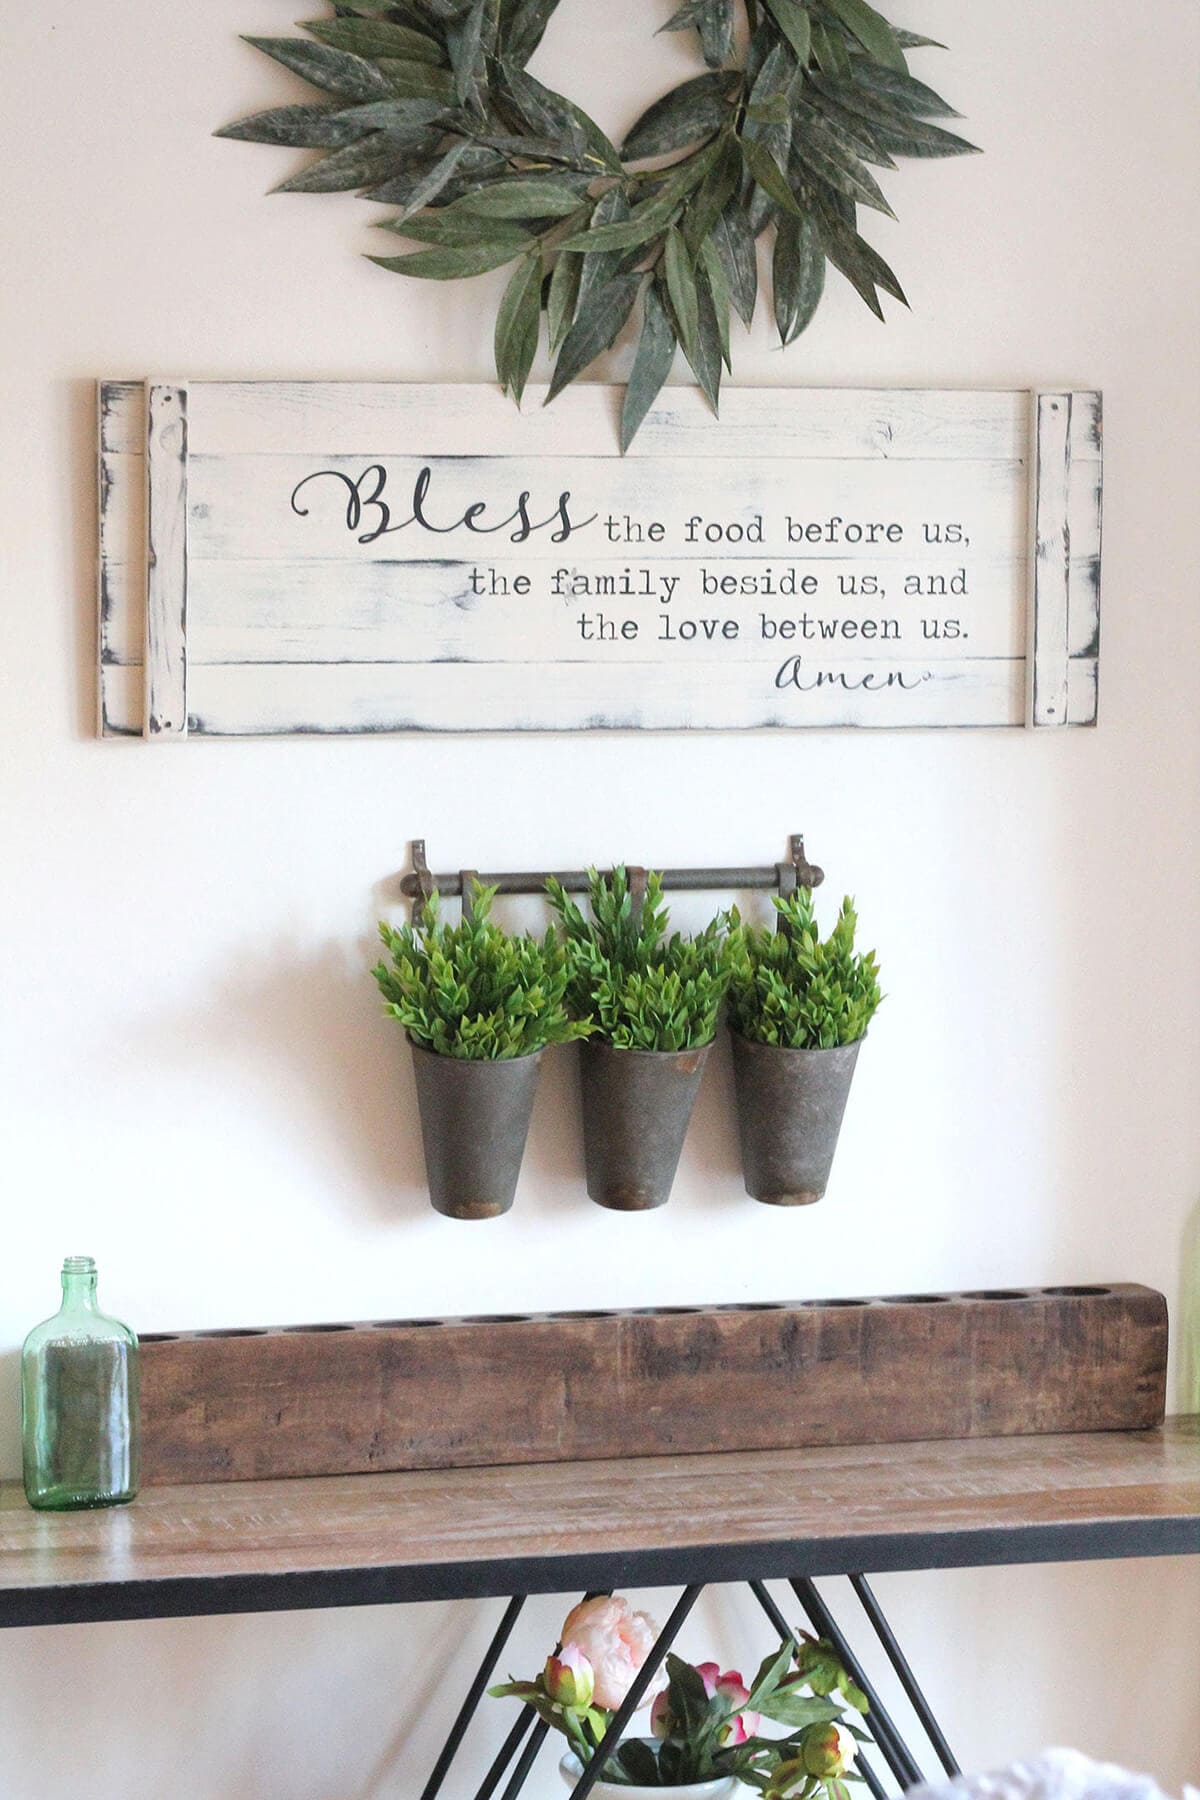 23 impressive hanging vases and planters ideas to decorate your boring wall - 71